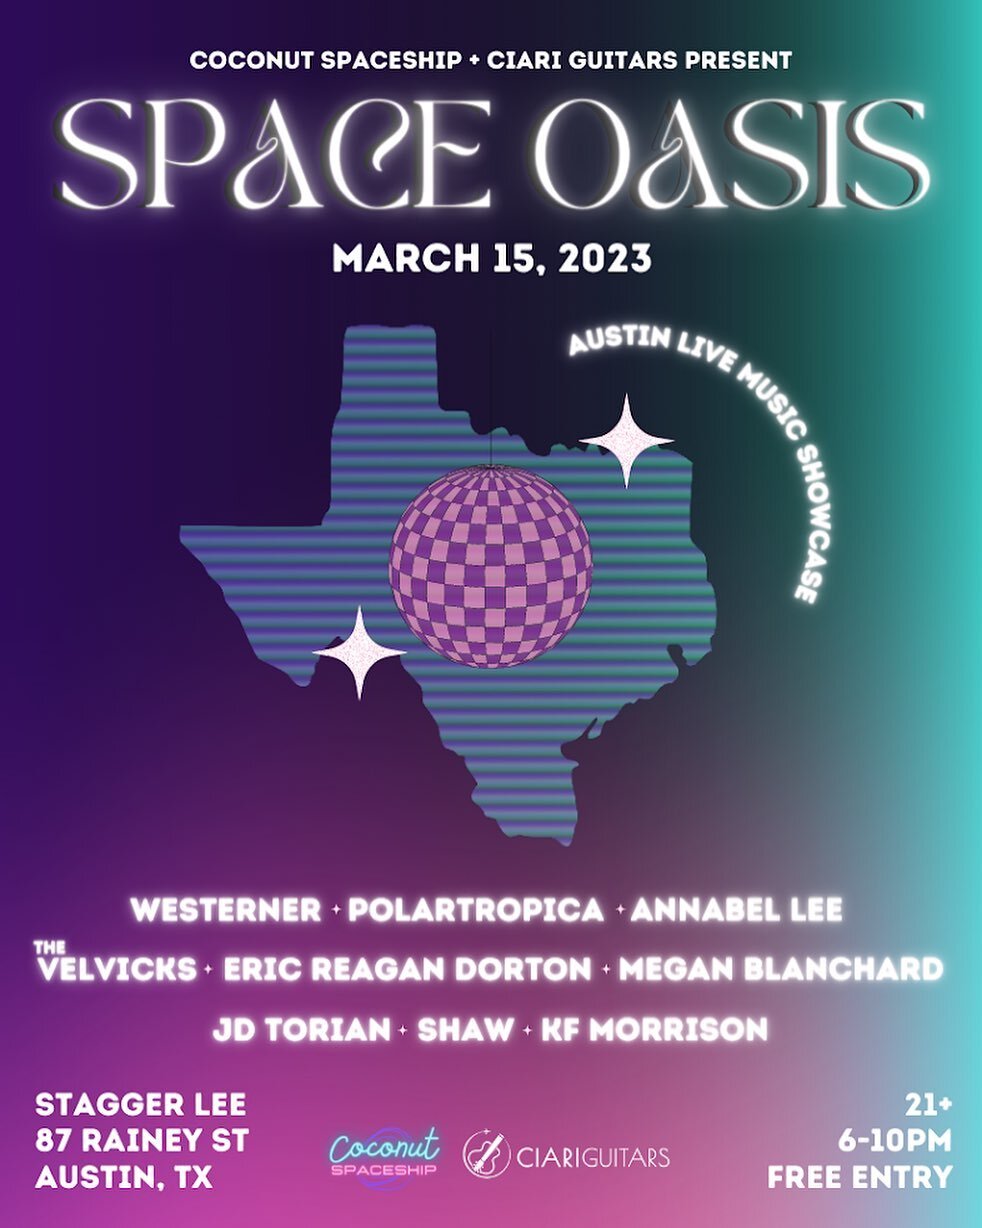 ✨New Show Added!✨ We&rsquo;re excited to share the stage with some old friends @polartropica and @thevelvicks as well as some new friends too!!!

Presented by @coconutspaceship &amp; @ciariguitars at @staggerleeaustin , this event will be a blend of 